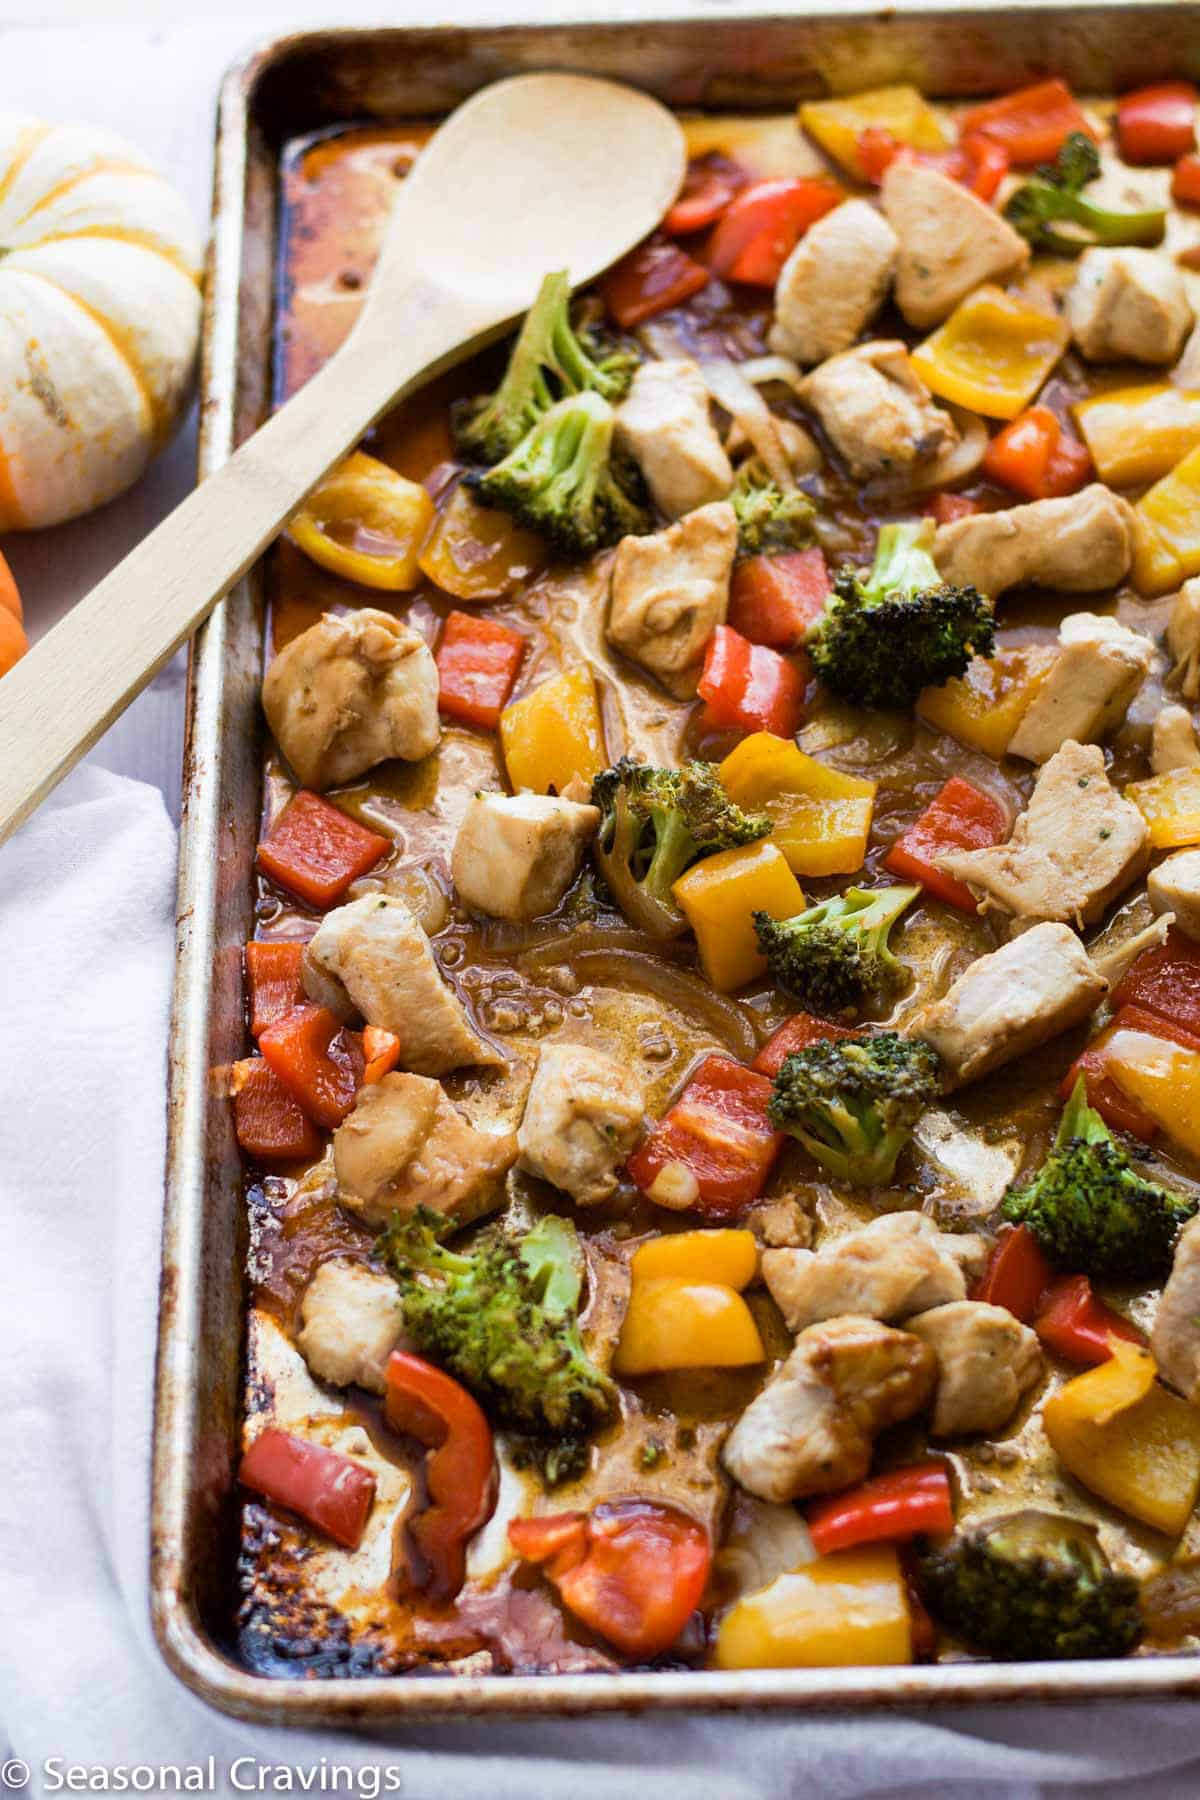 stir fry chicken with vegetables in a sheet pan with a wooden spoon